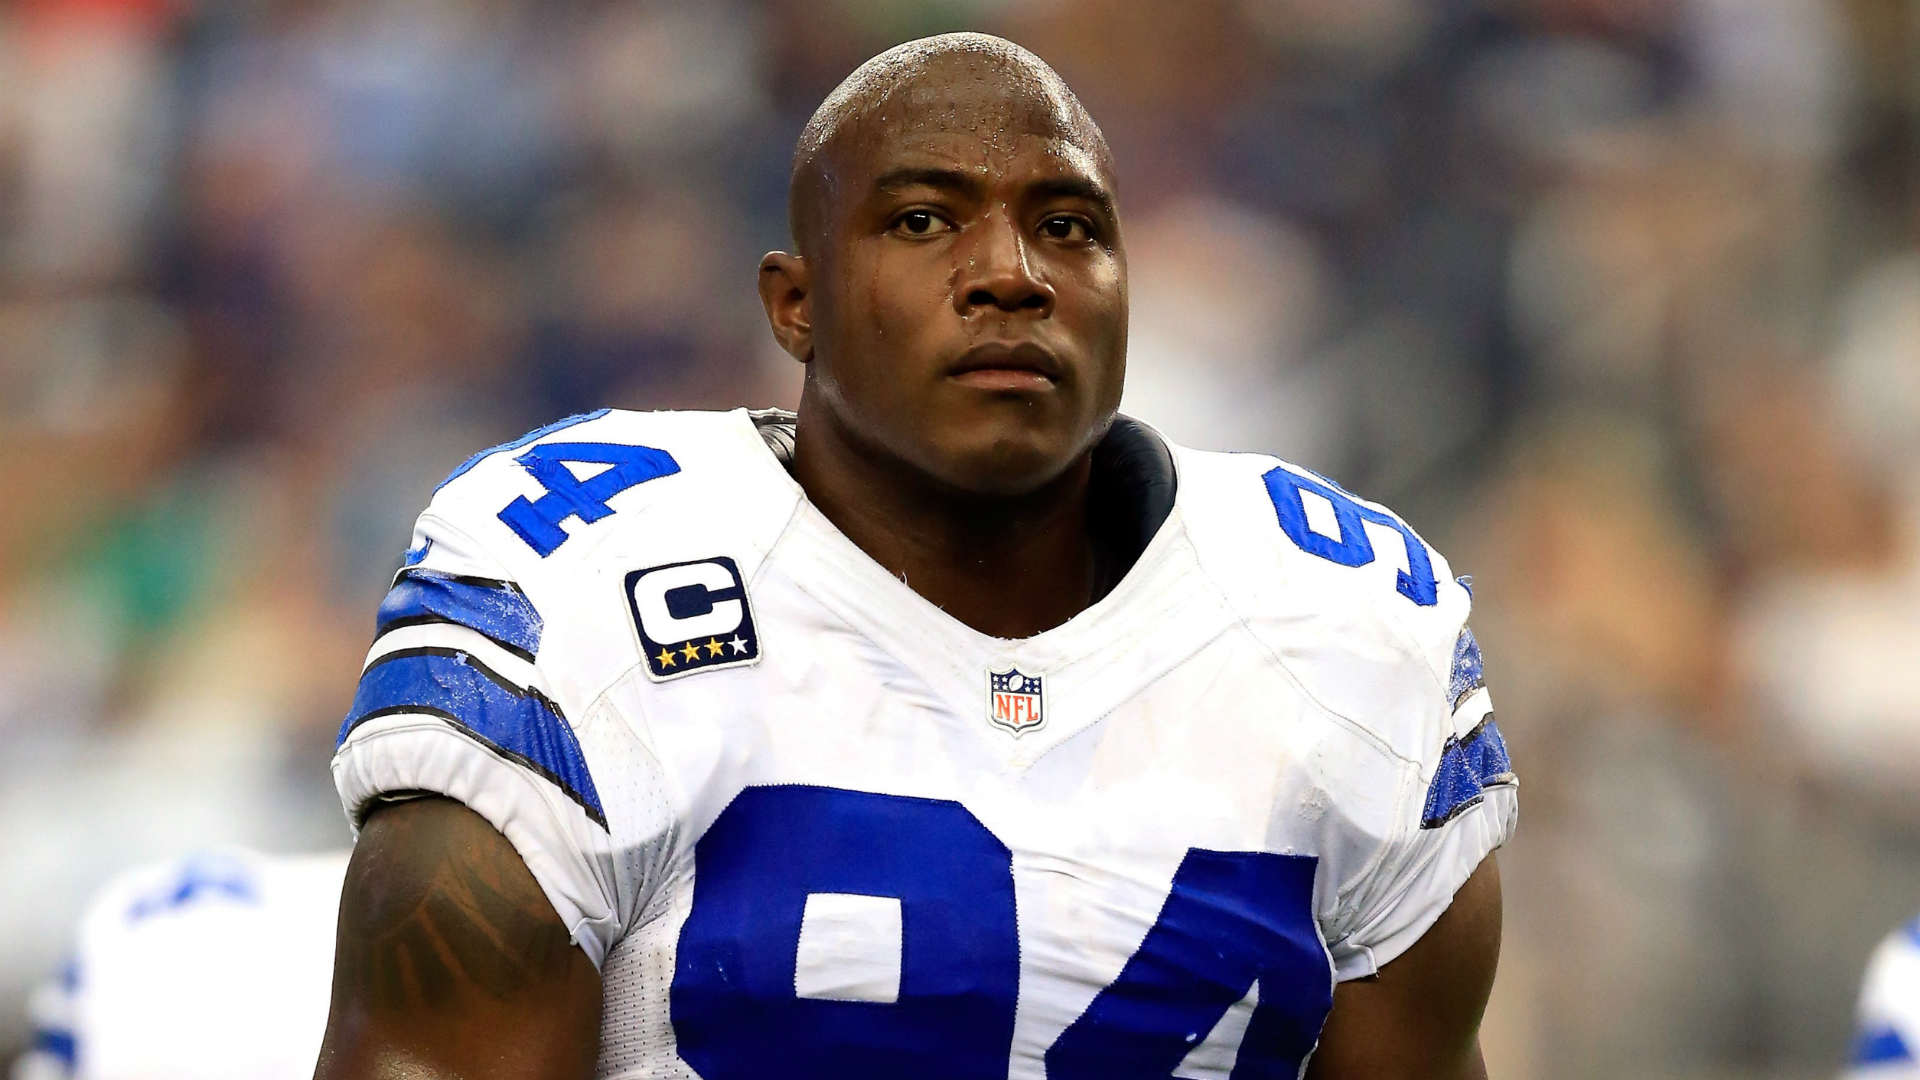 DeMarcus Ware joins Cowboys broadcast team for preseason games NFL